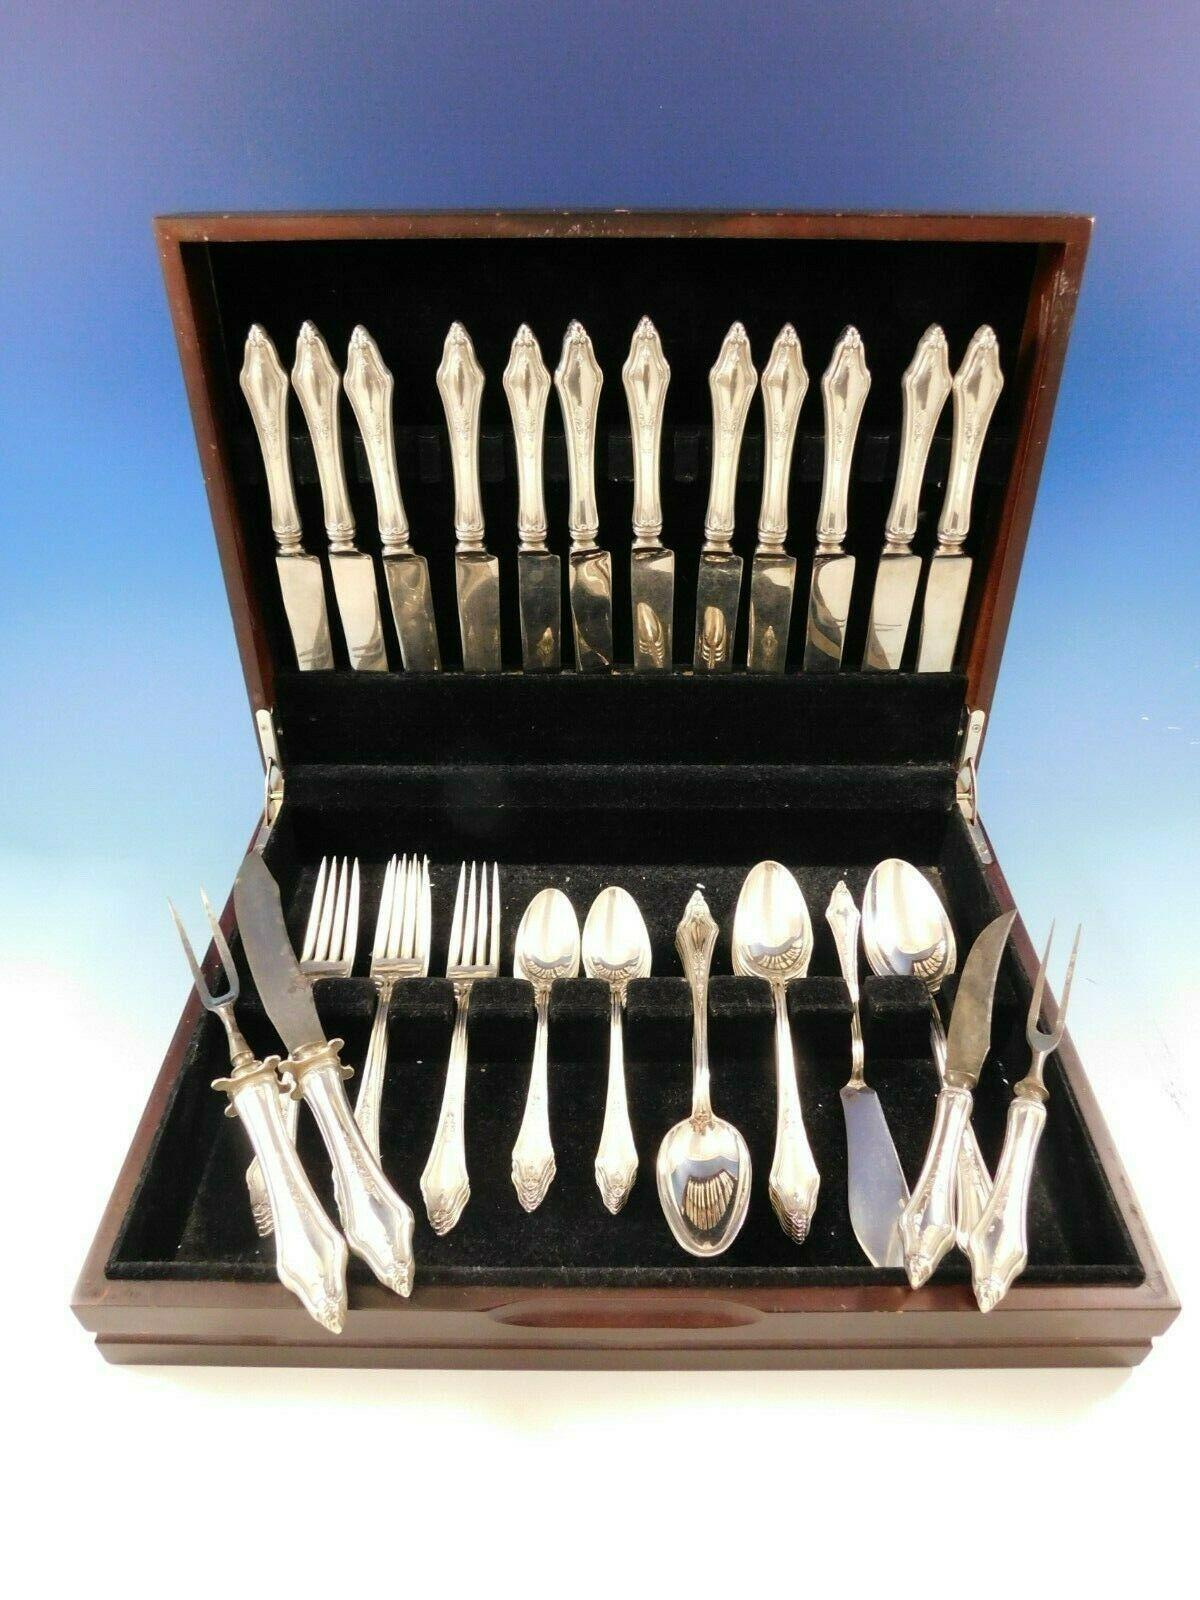 Stunning Arcadian by Towle sterling silver flatware set - 54 pieces. This set includes:

 12 knives, 8 3/4